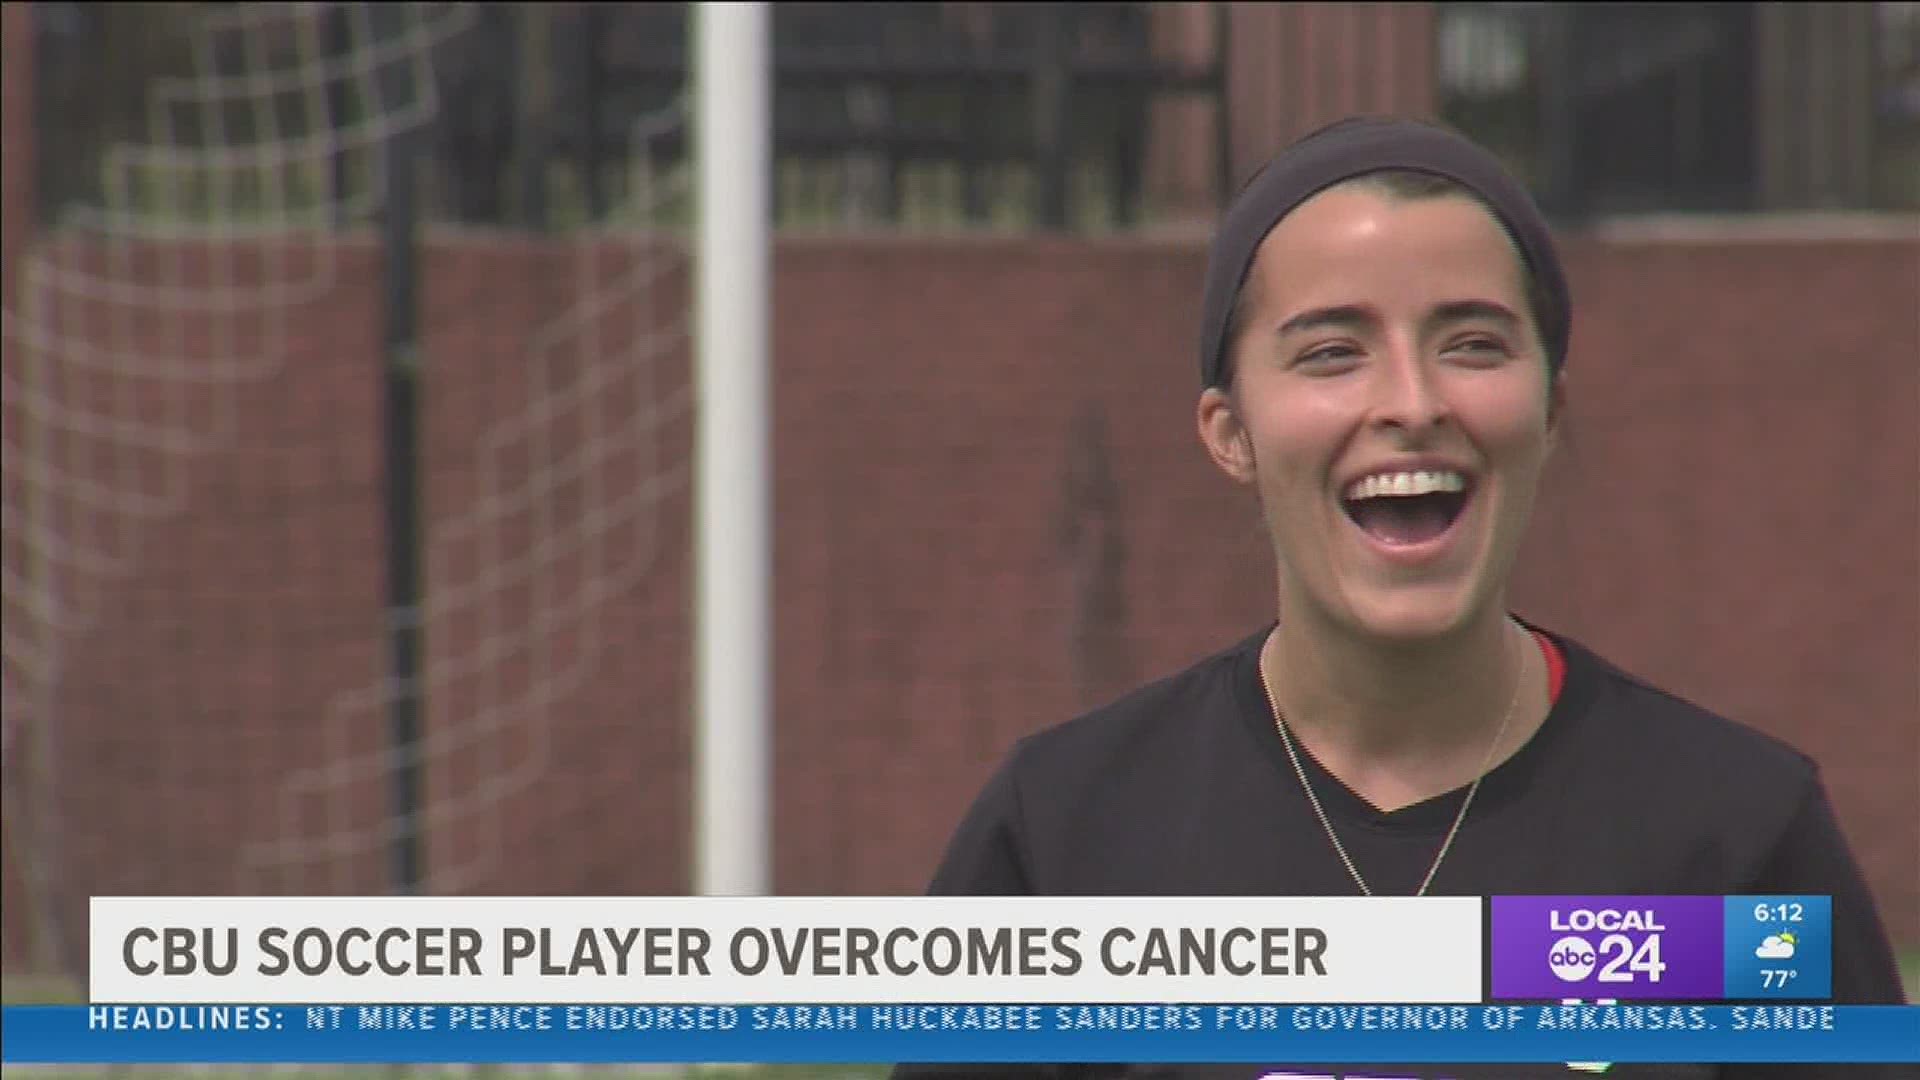 After a 10-month chemo treatment, Della Rosa had a dream that she would make a game-winning assist during her first home game...it came true!